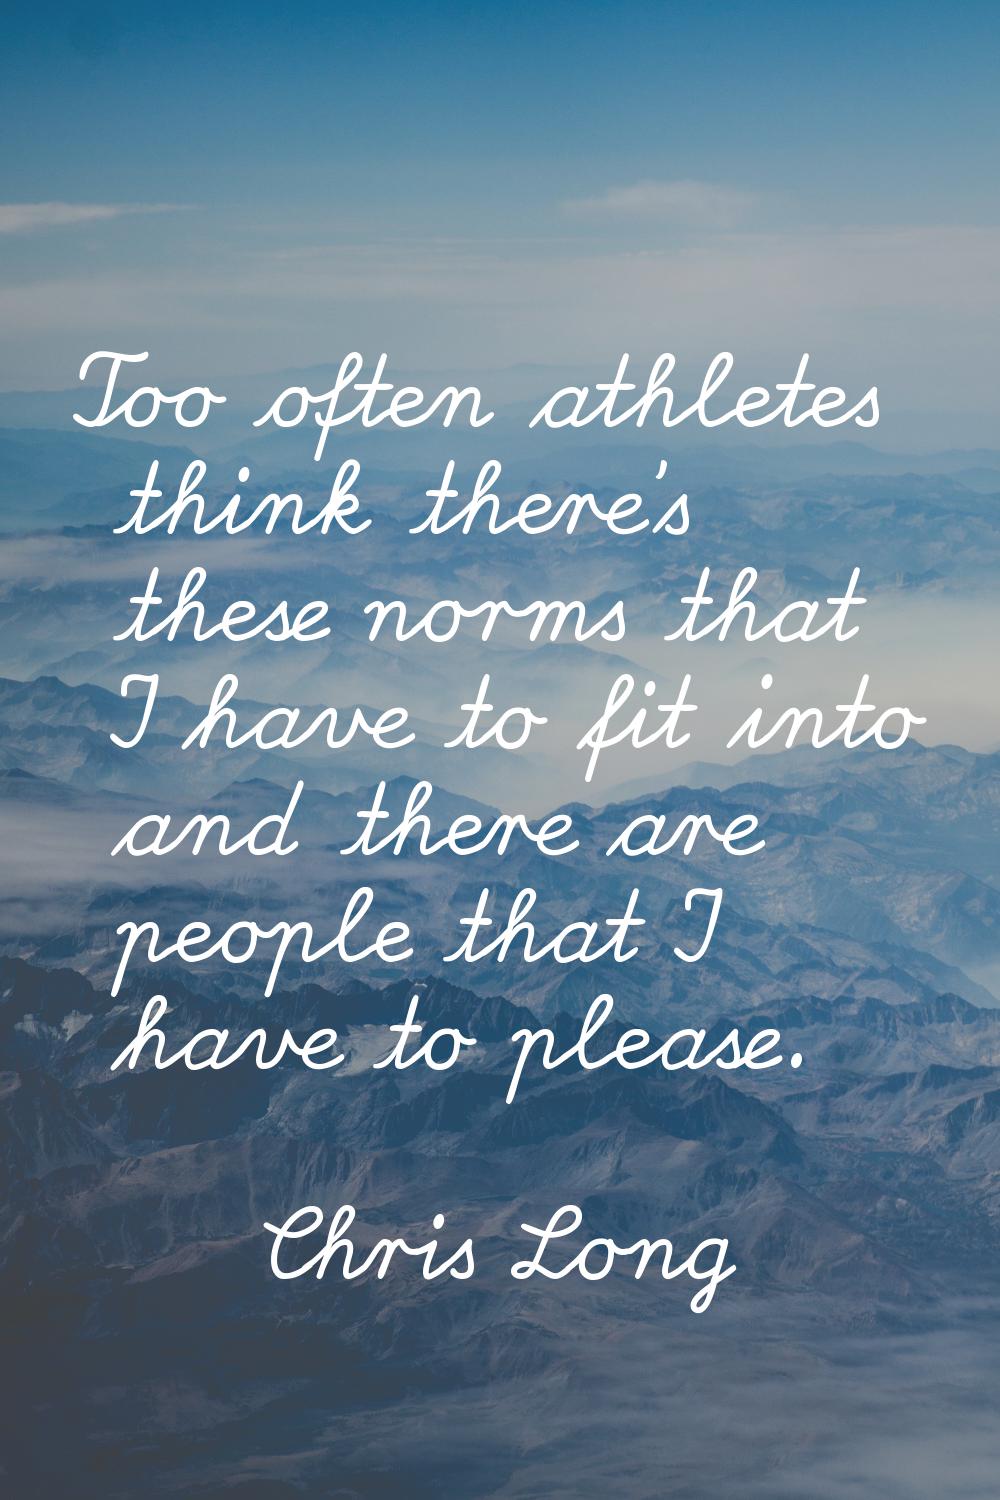 Too often athletes think there's these norms that I have to fit into and there are people that I ha